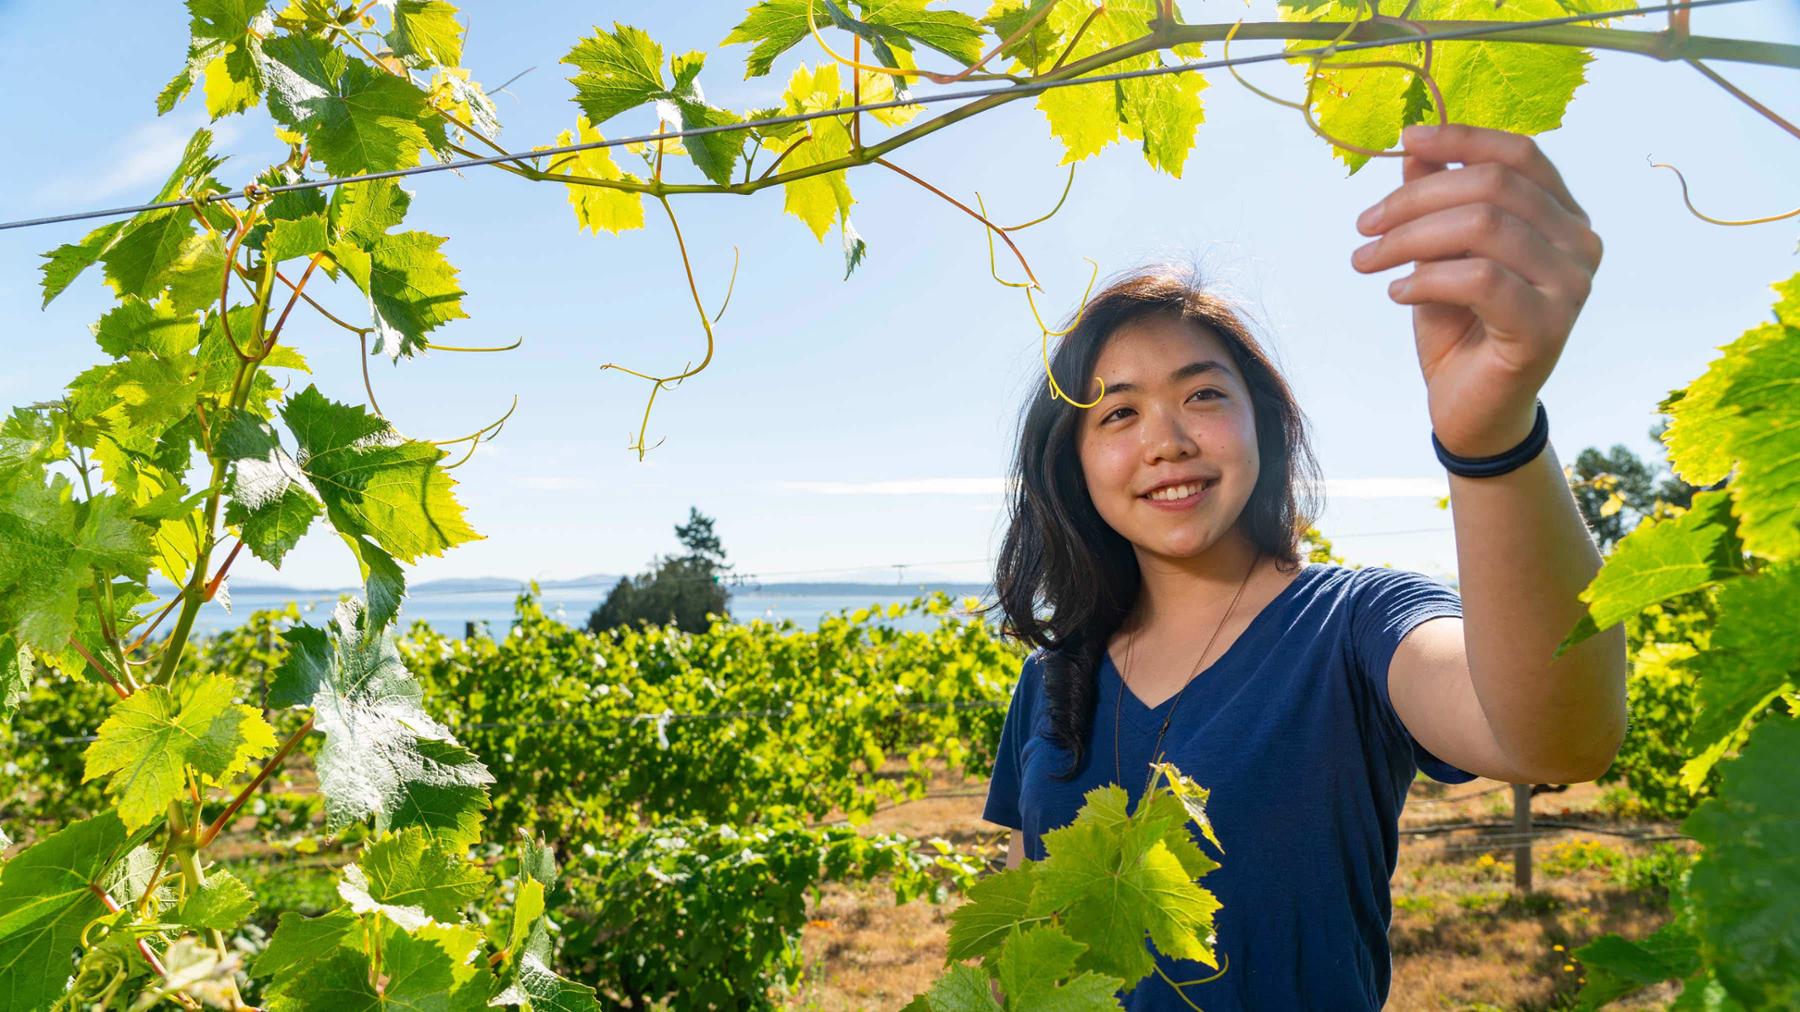 A young woman of Asian descent stands smiling in a blue V-neck t-shirt among grape vines on a vineyard owned by the Canadian Food Inspection Agency. It is a warm, sunny summer day; the colours are vibrant and there is a light haze to the air. With distant mountains and a trace of the ocean in the background, the woman is visible from the torso up, framed by vine leaves in the foreground, one of which she reaches out to inspect.